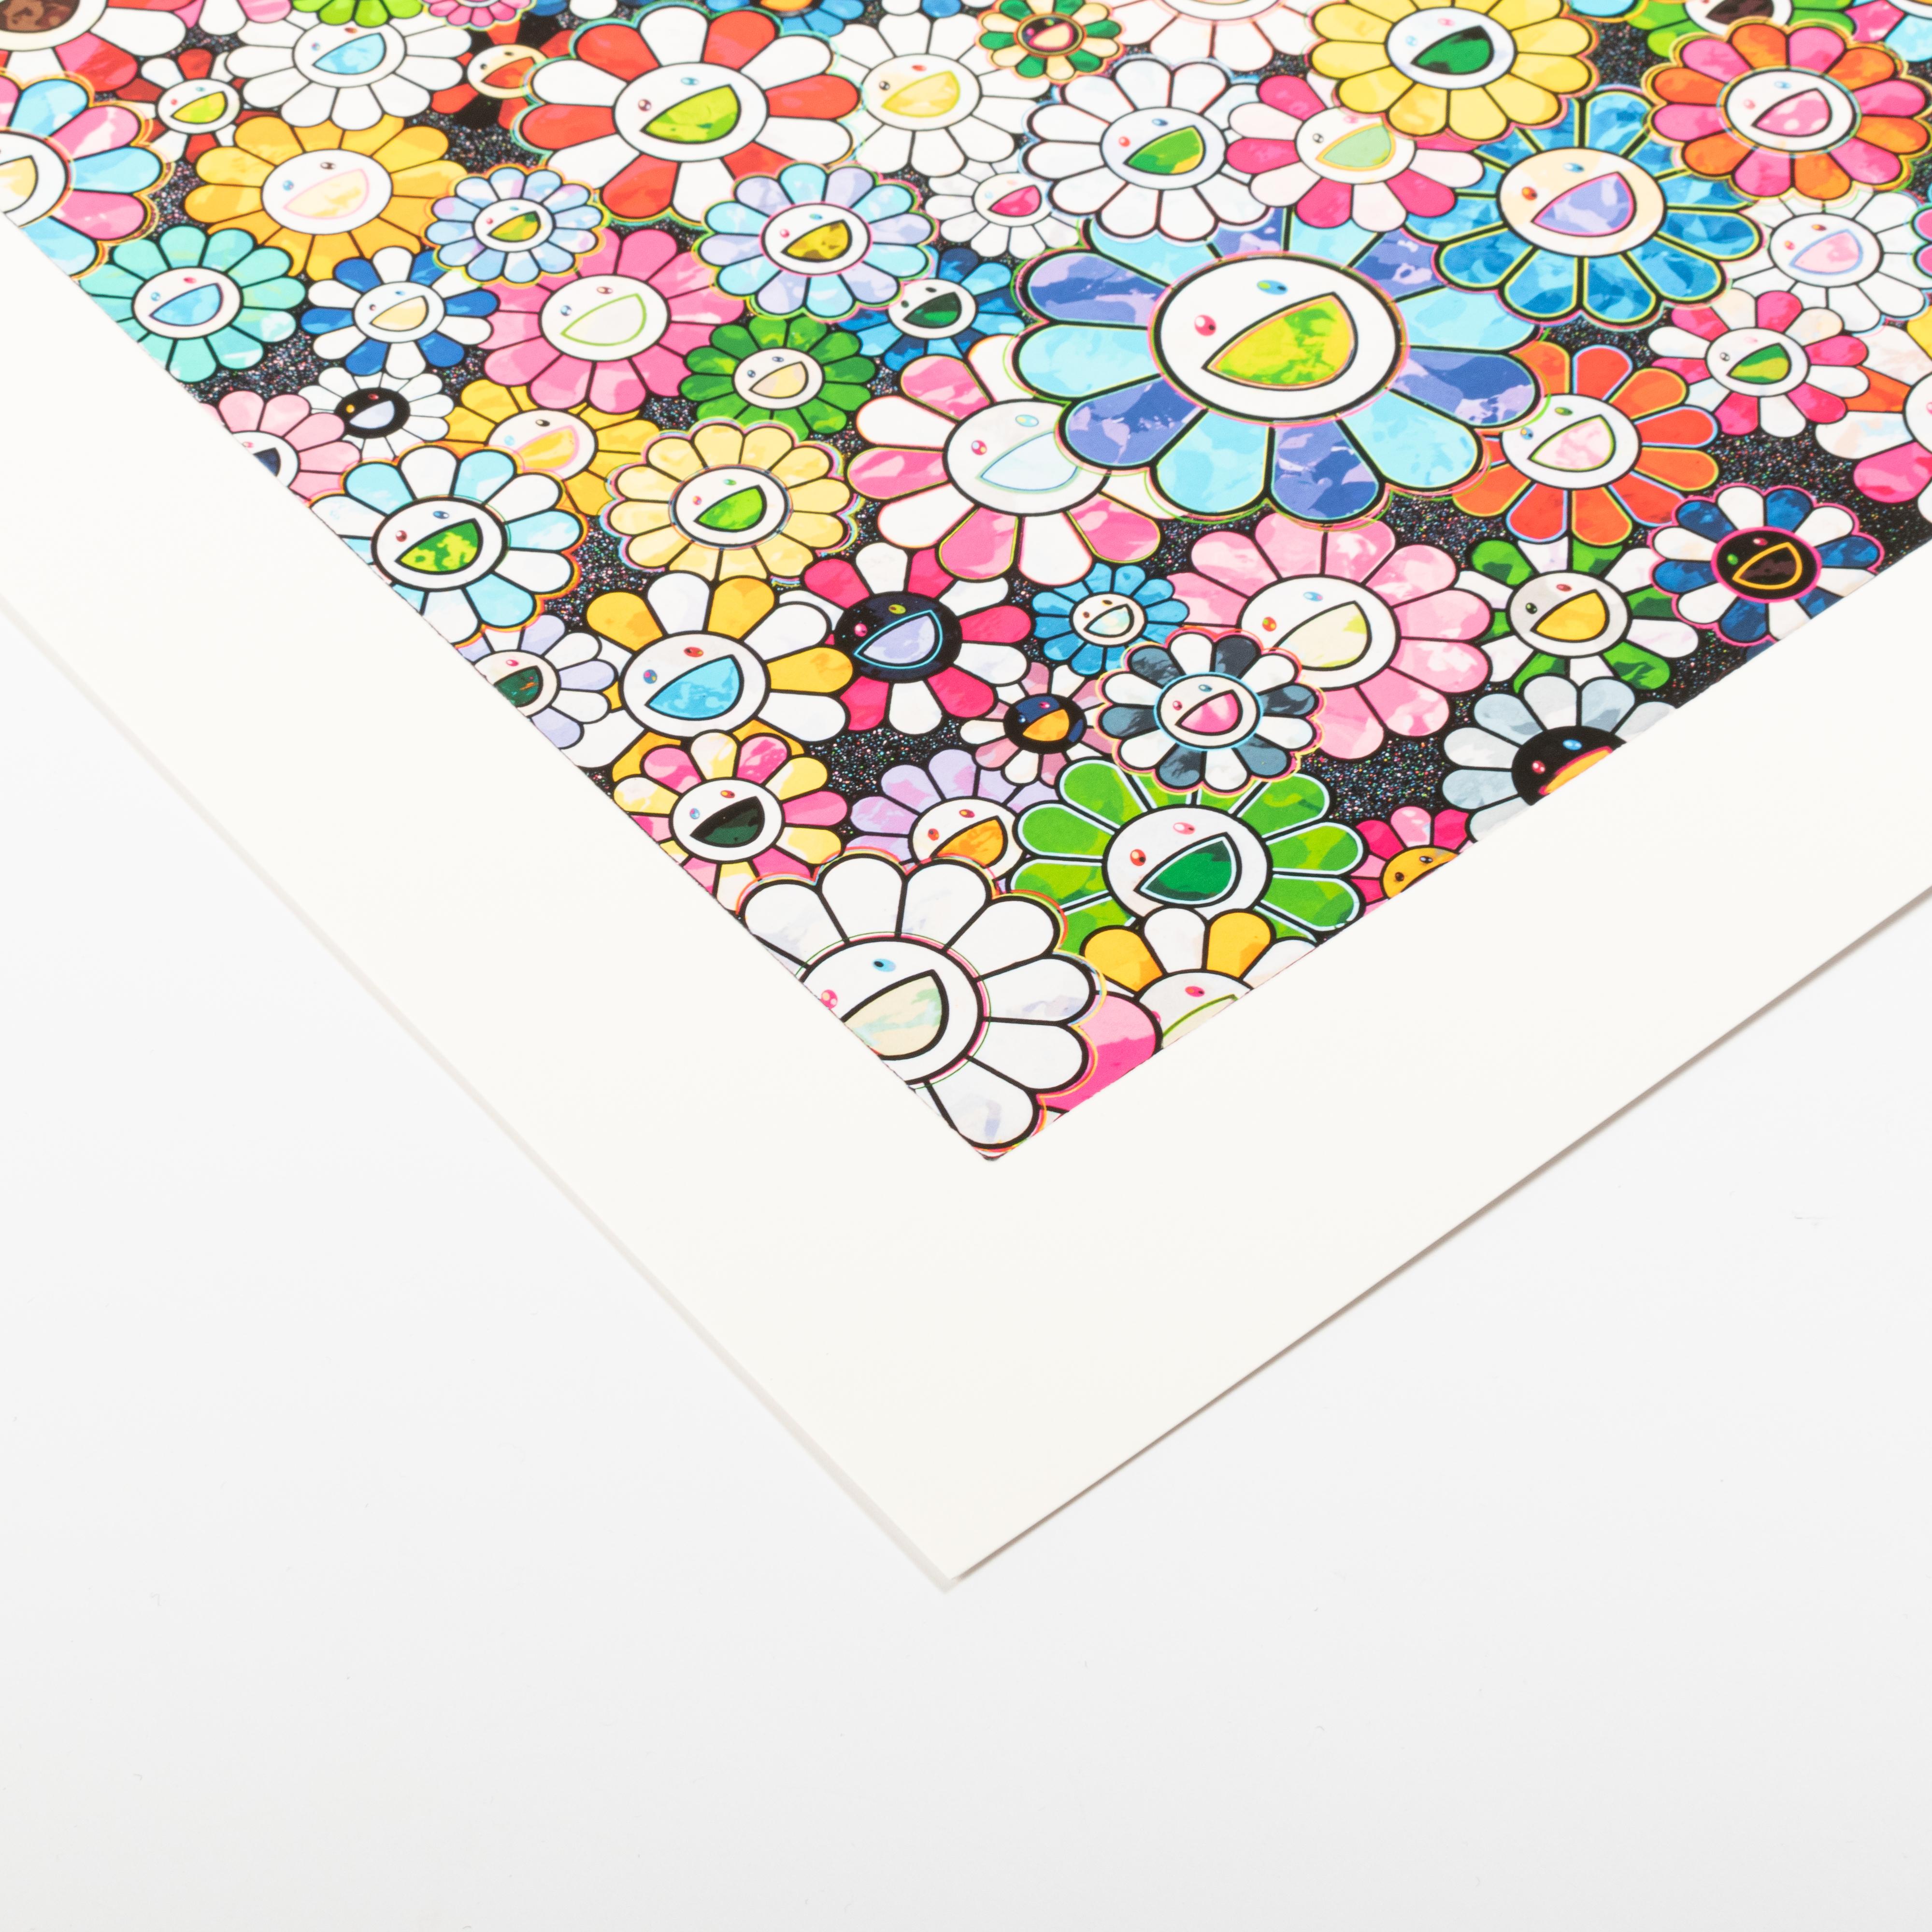 The Future will Be Full of Smile!, For Sure! - Print by Takashi Murakami